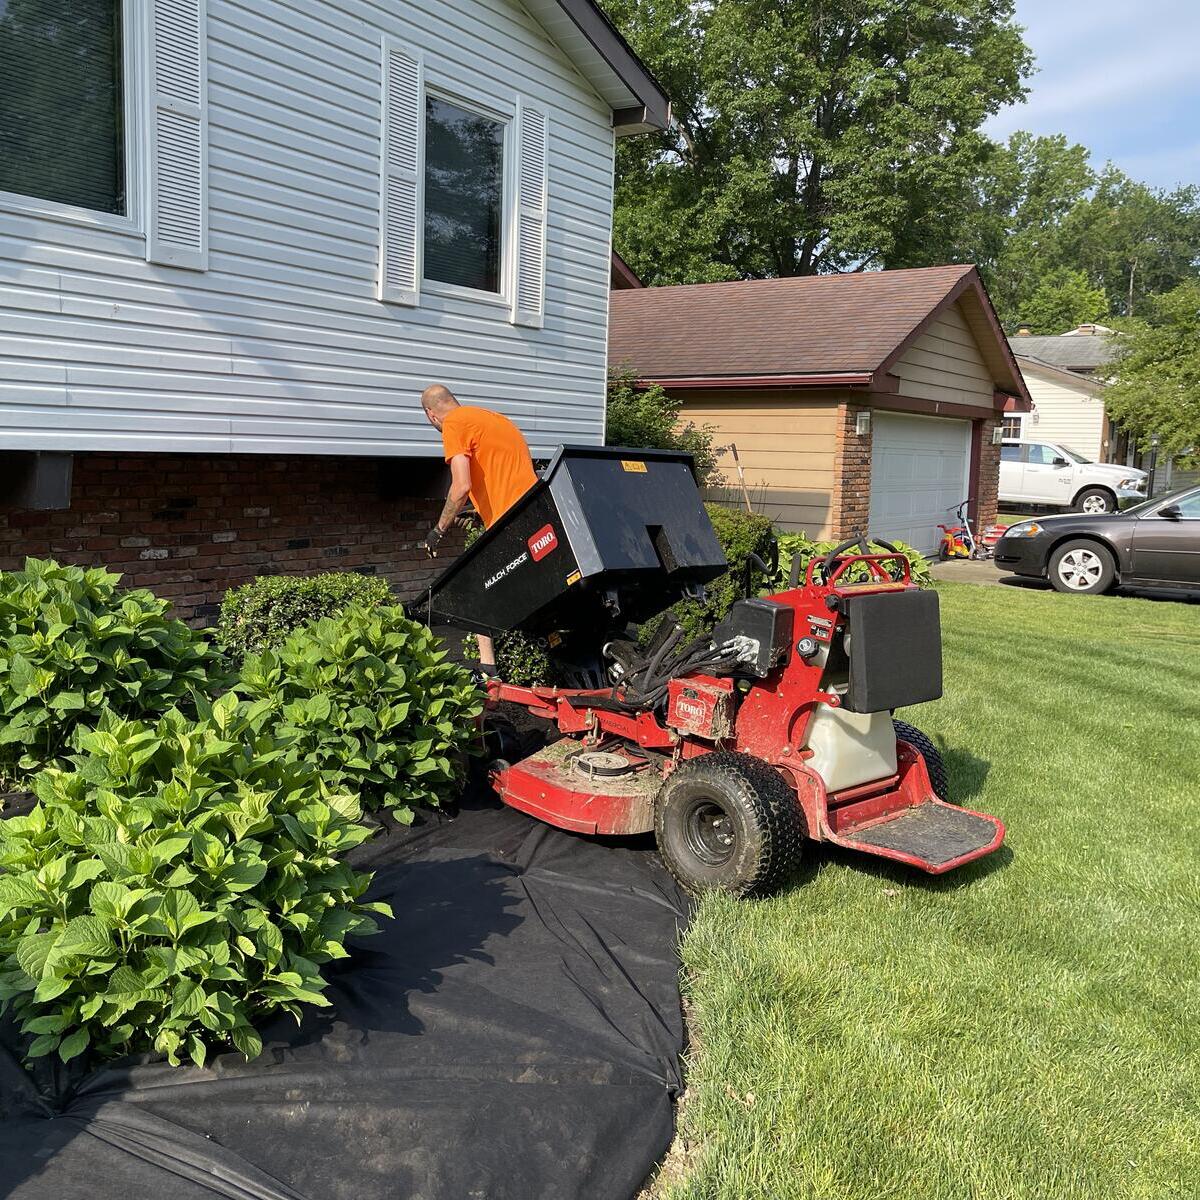 AARON'S Lawn Care LLC 9300 Lindbergh Blvd, Olmsted Falls Ohio 44138